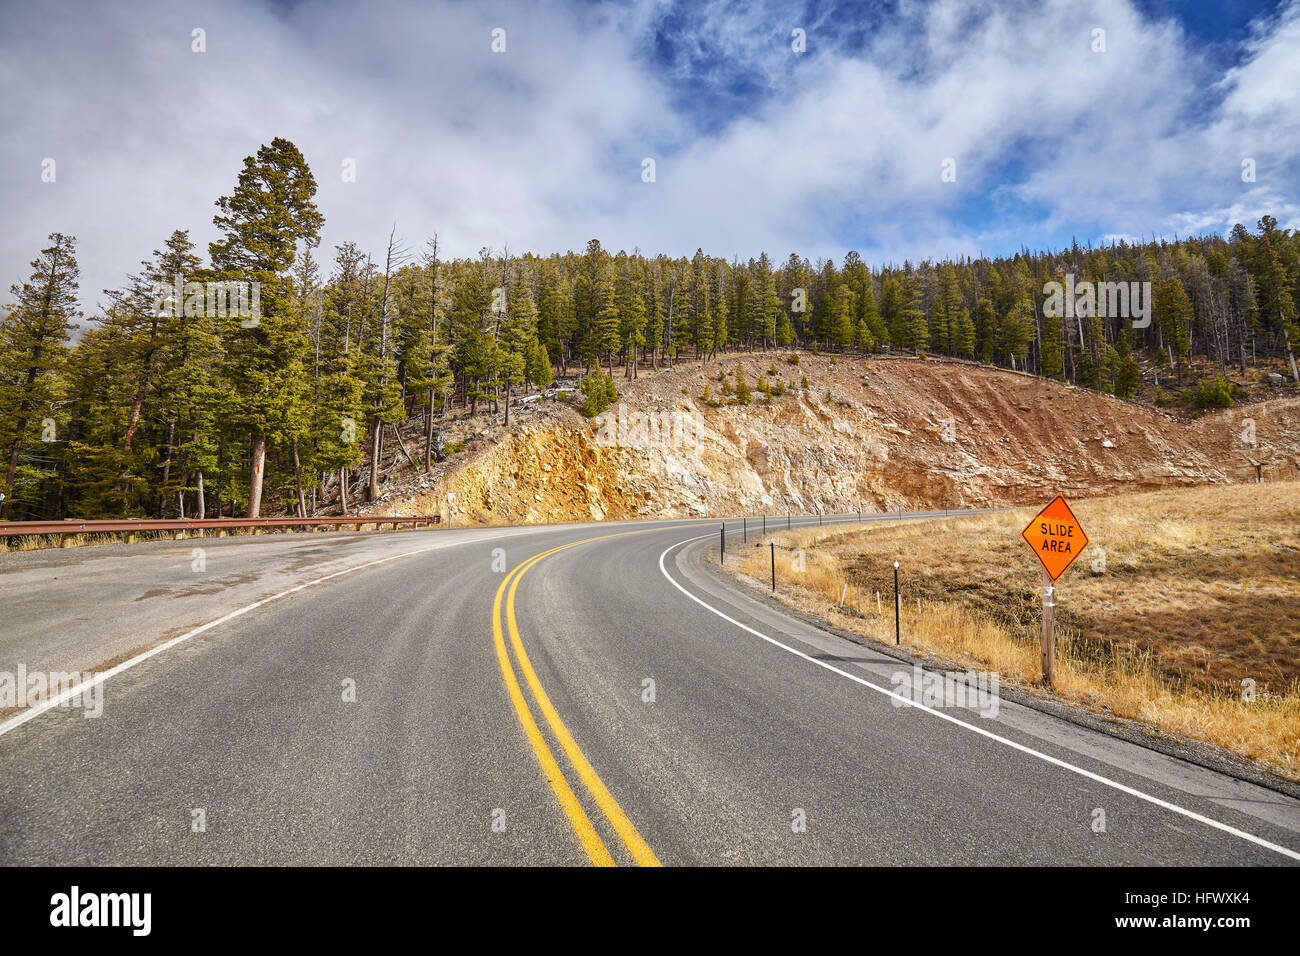 Mountain road curve with slide area warning sign. Stock Photo